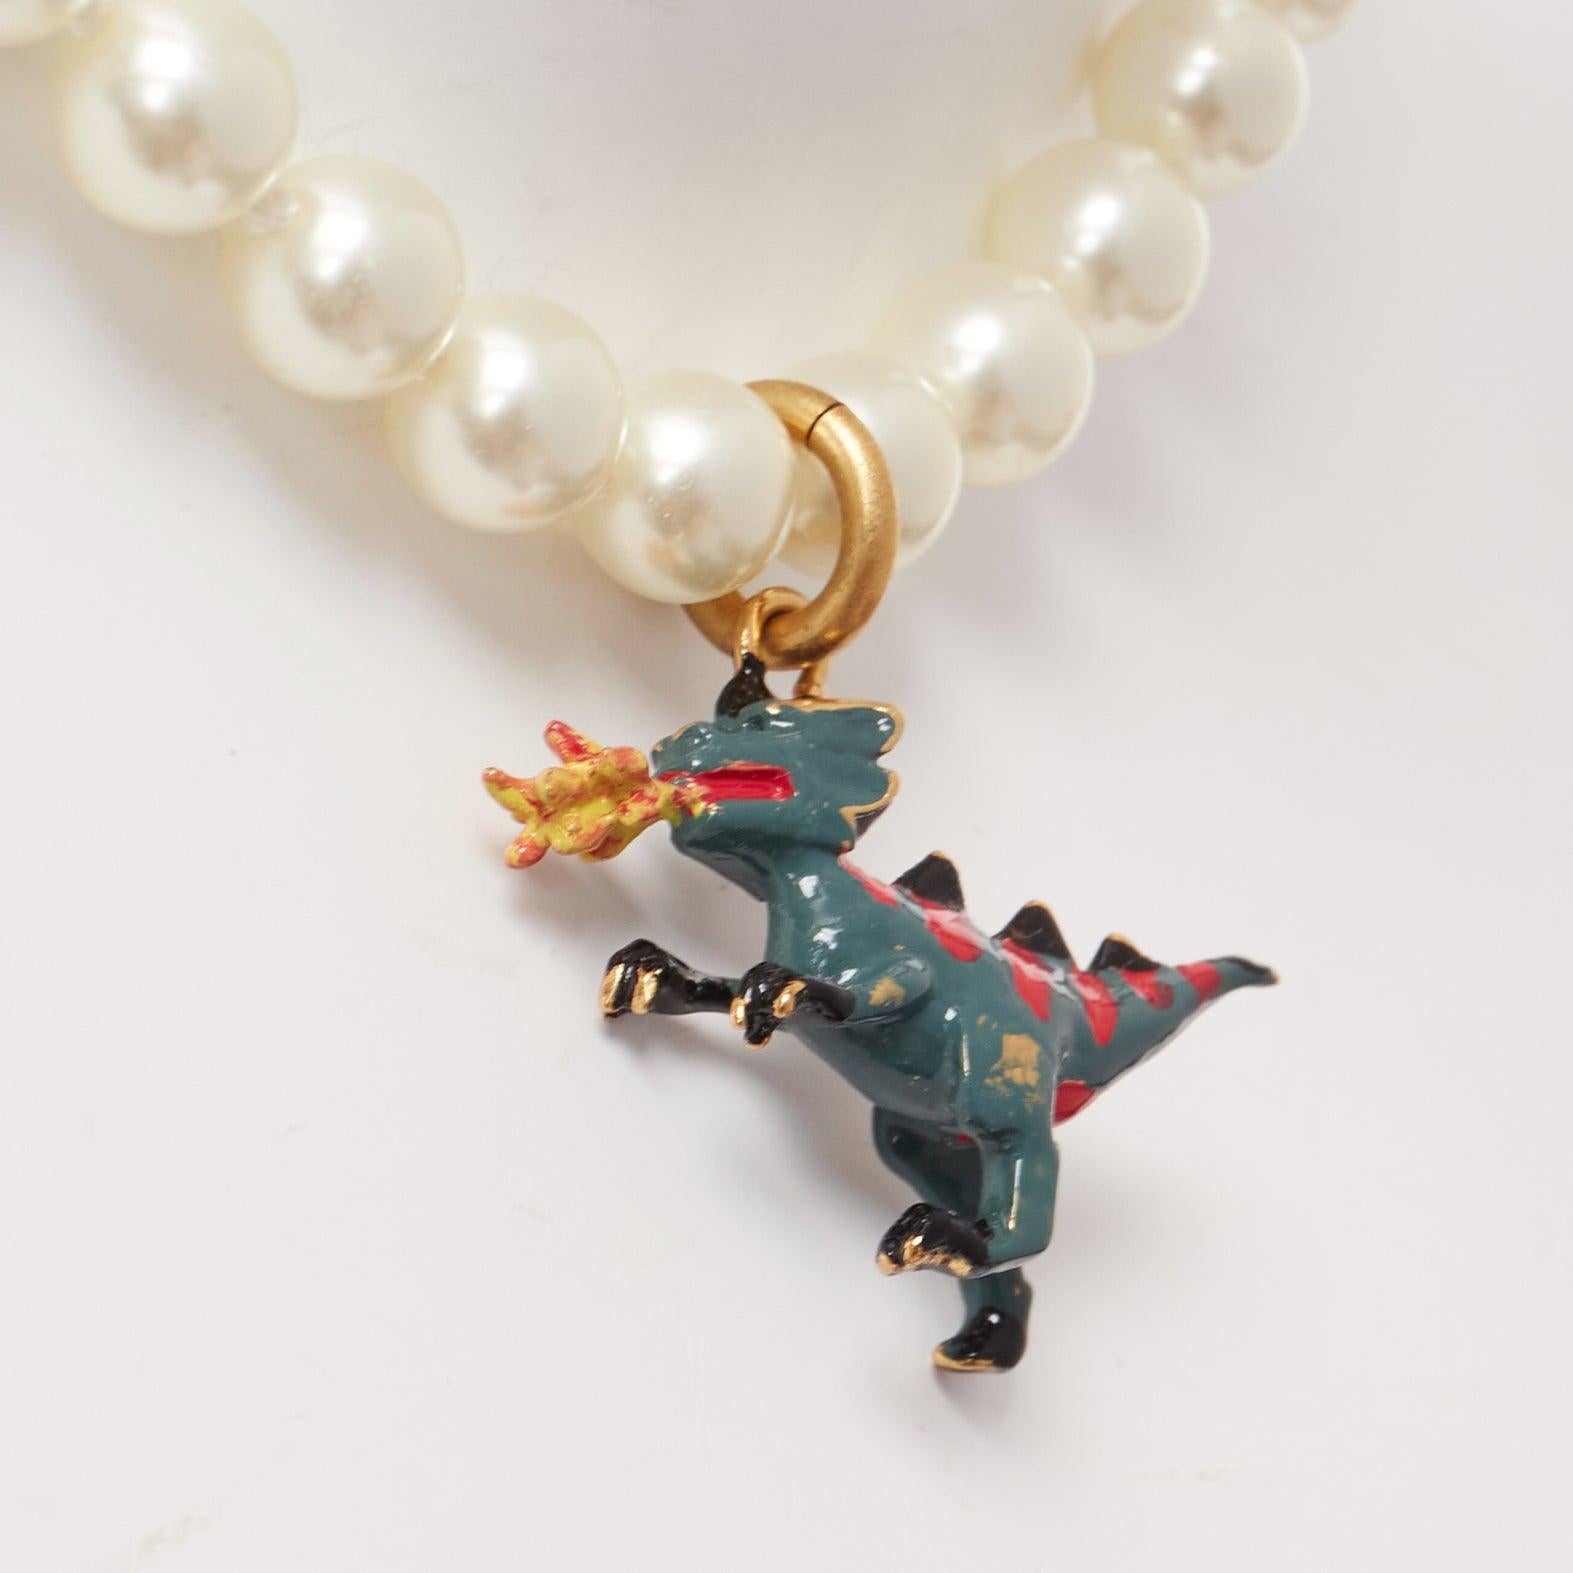 rare DIOR CD logo green fire dinosaur dragon pendant pearl choker necklace
Reference: AAWC/A00918
Brand: Dior
Designer: Maria Grazia Chiuri
Material: Metal, Faux Pearl
Color: Pearl, Green
Pattern: Solid
Closure: Lobster Clasp
Lining: Pearl
Extra